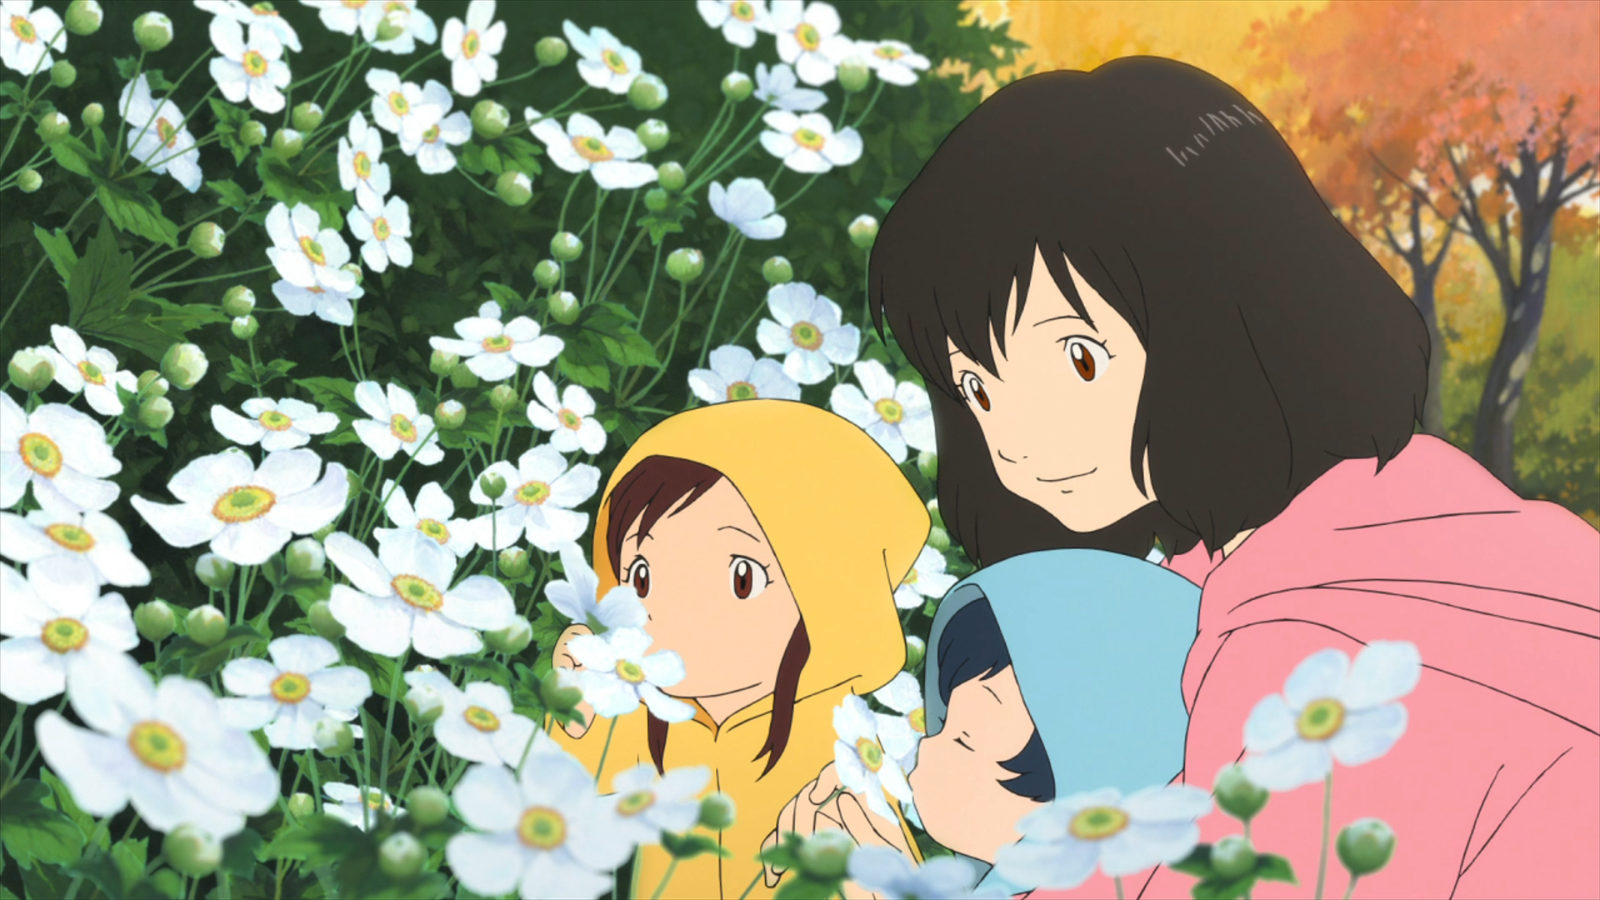 A Woman And Child Are In A Field Of Flowers